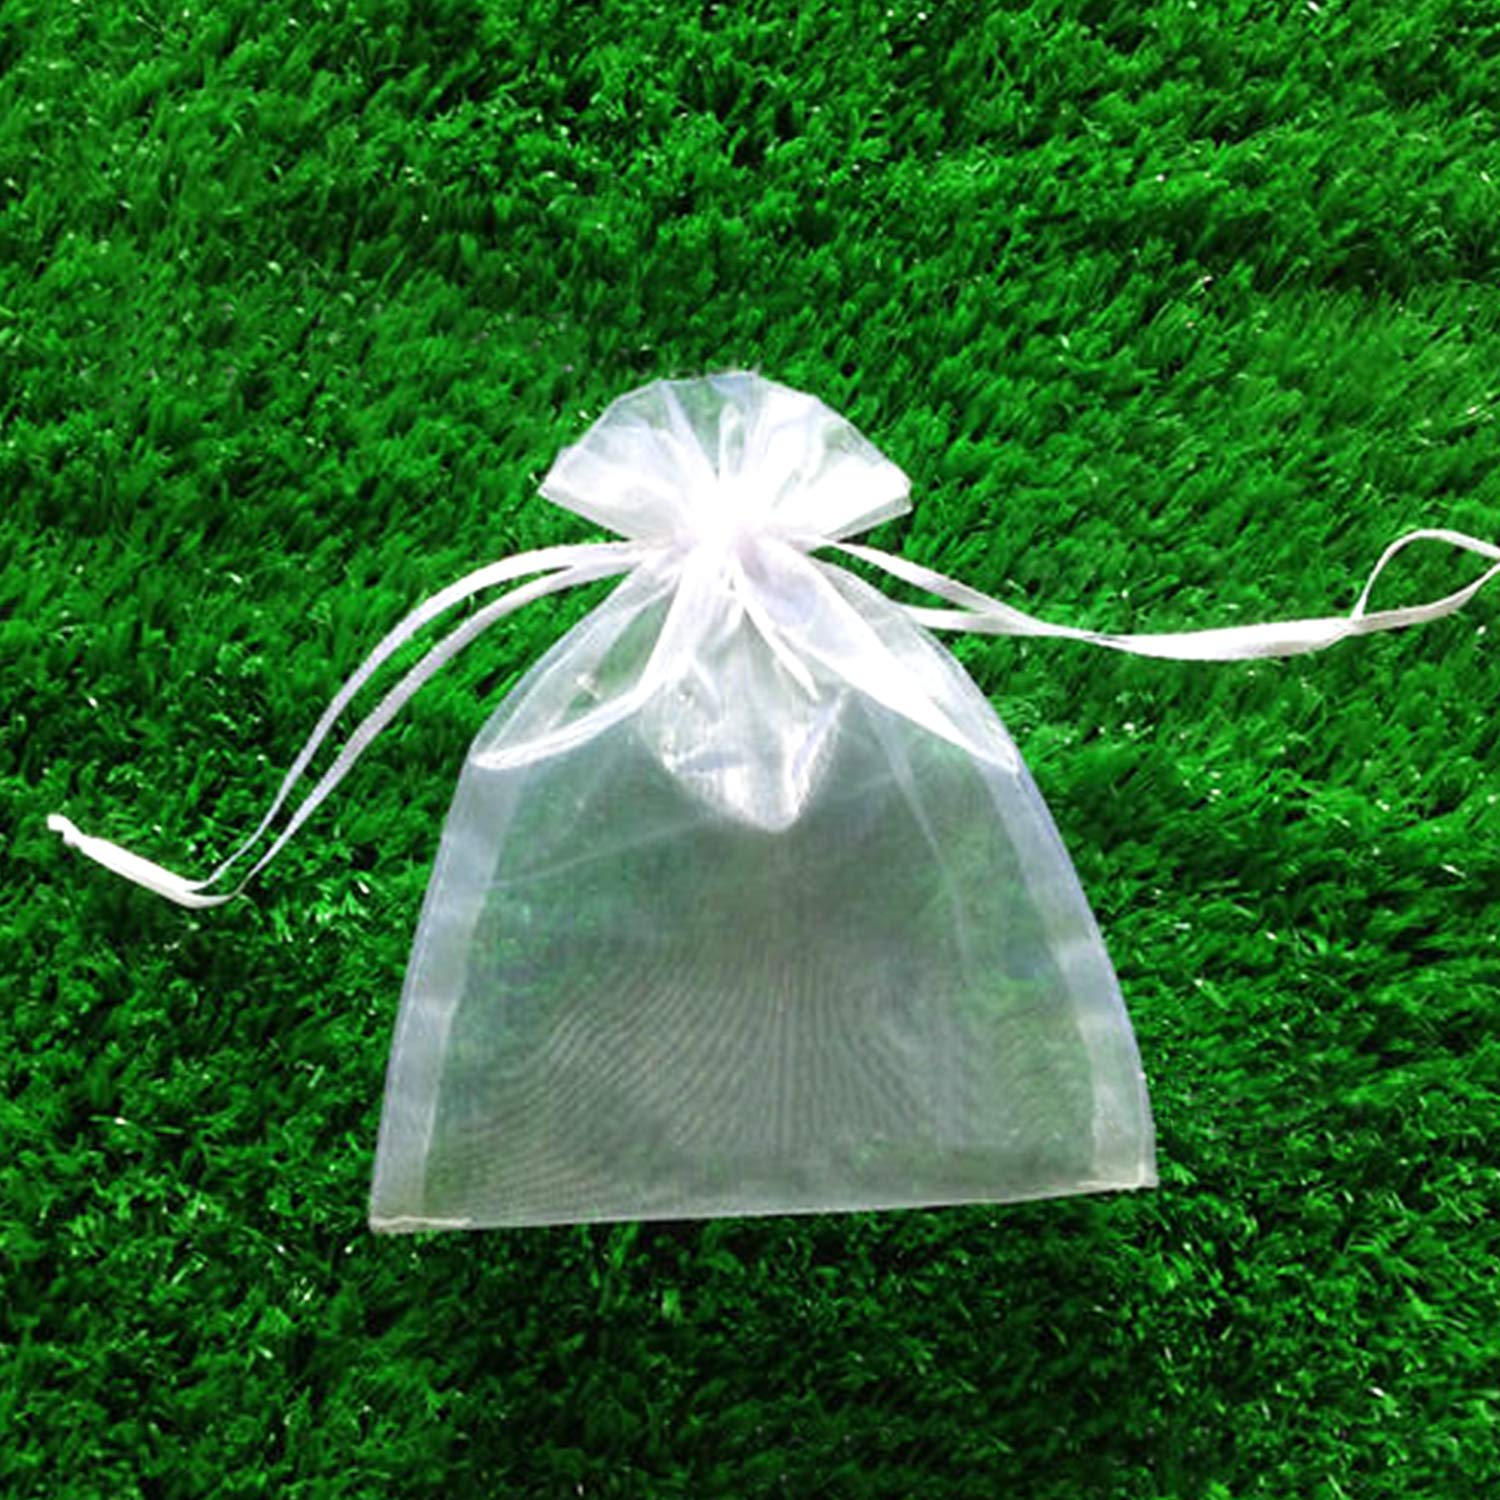 100 Pack Sheer Organza Bags White, 6 x 9 inches Christmas Wedding Shower Party Favors Gift Drawstring Bags Large Mesh Jewelry Pouches,Penetrating Light Fruit Protection Bags